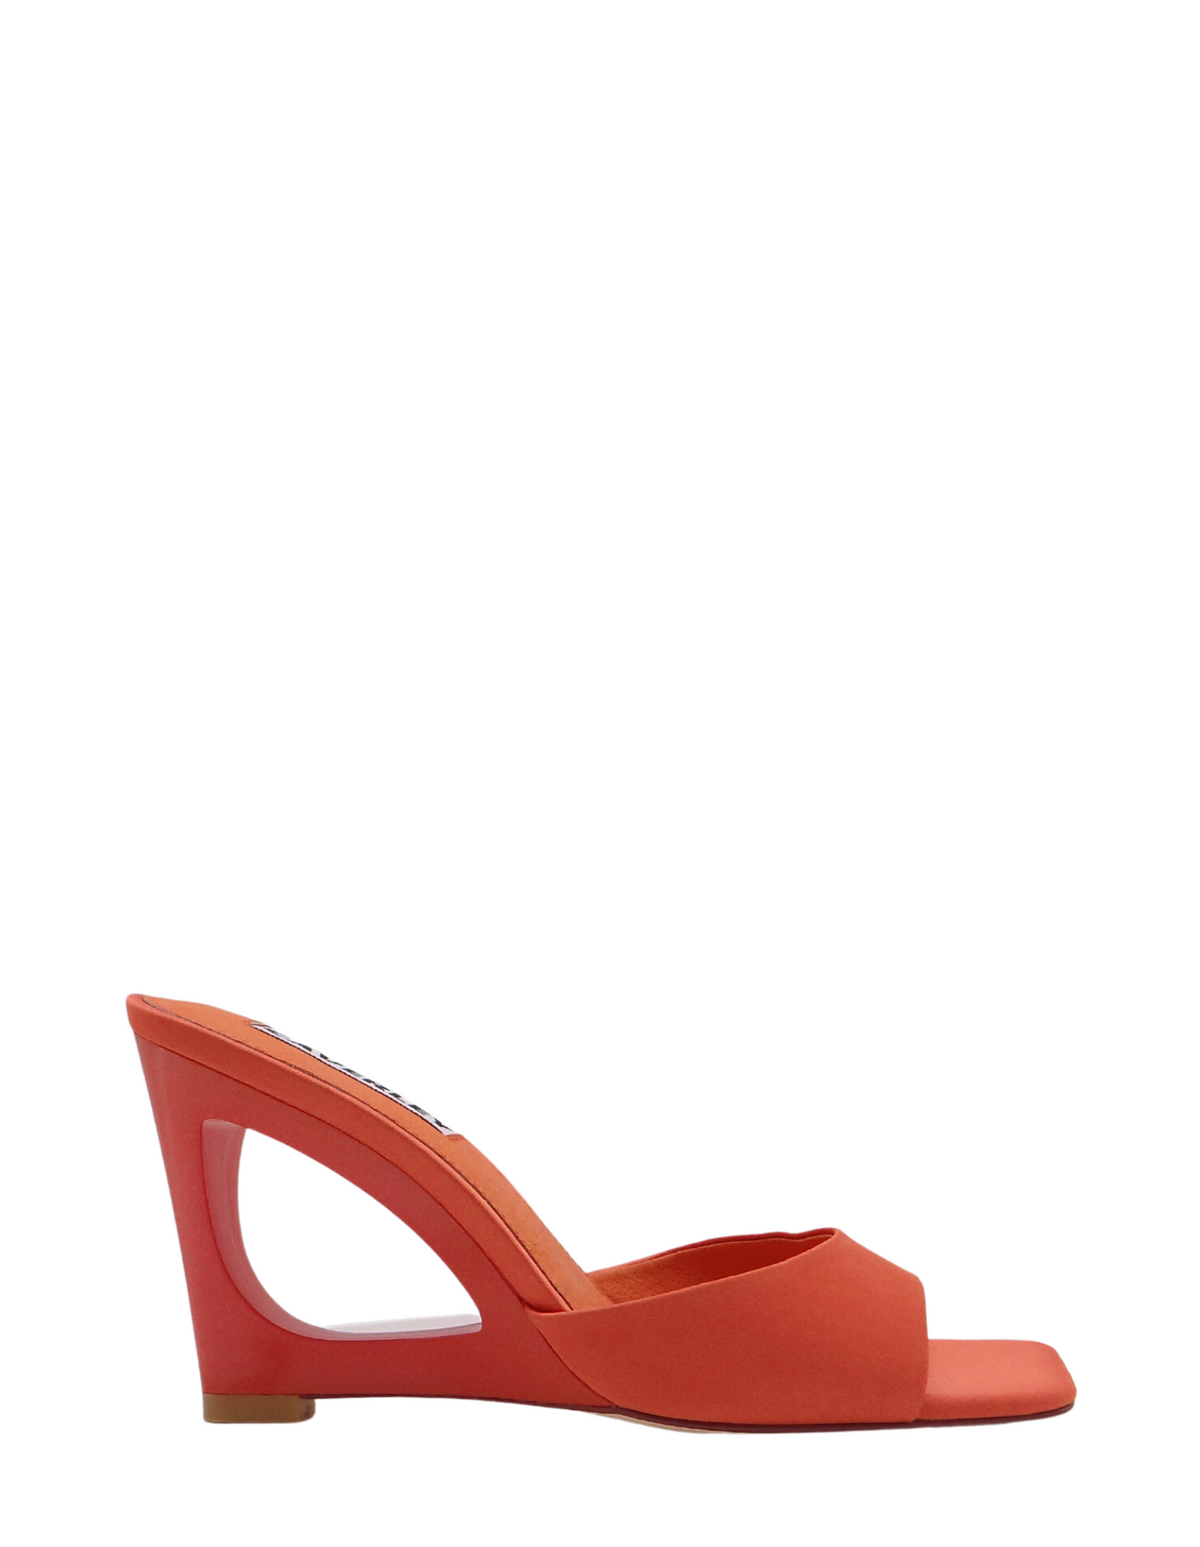 Parallel Culture Shoes and Fashion Online WEDGES CAVERLY OZI WEDGE CORAL SATIN